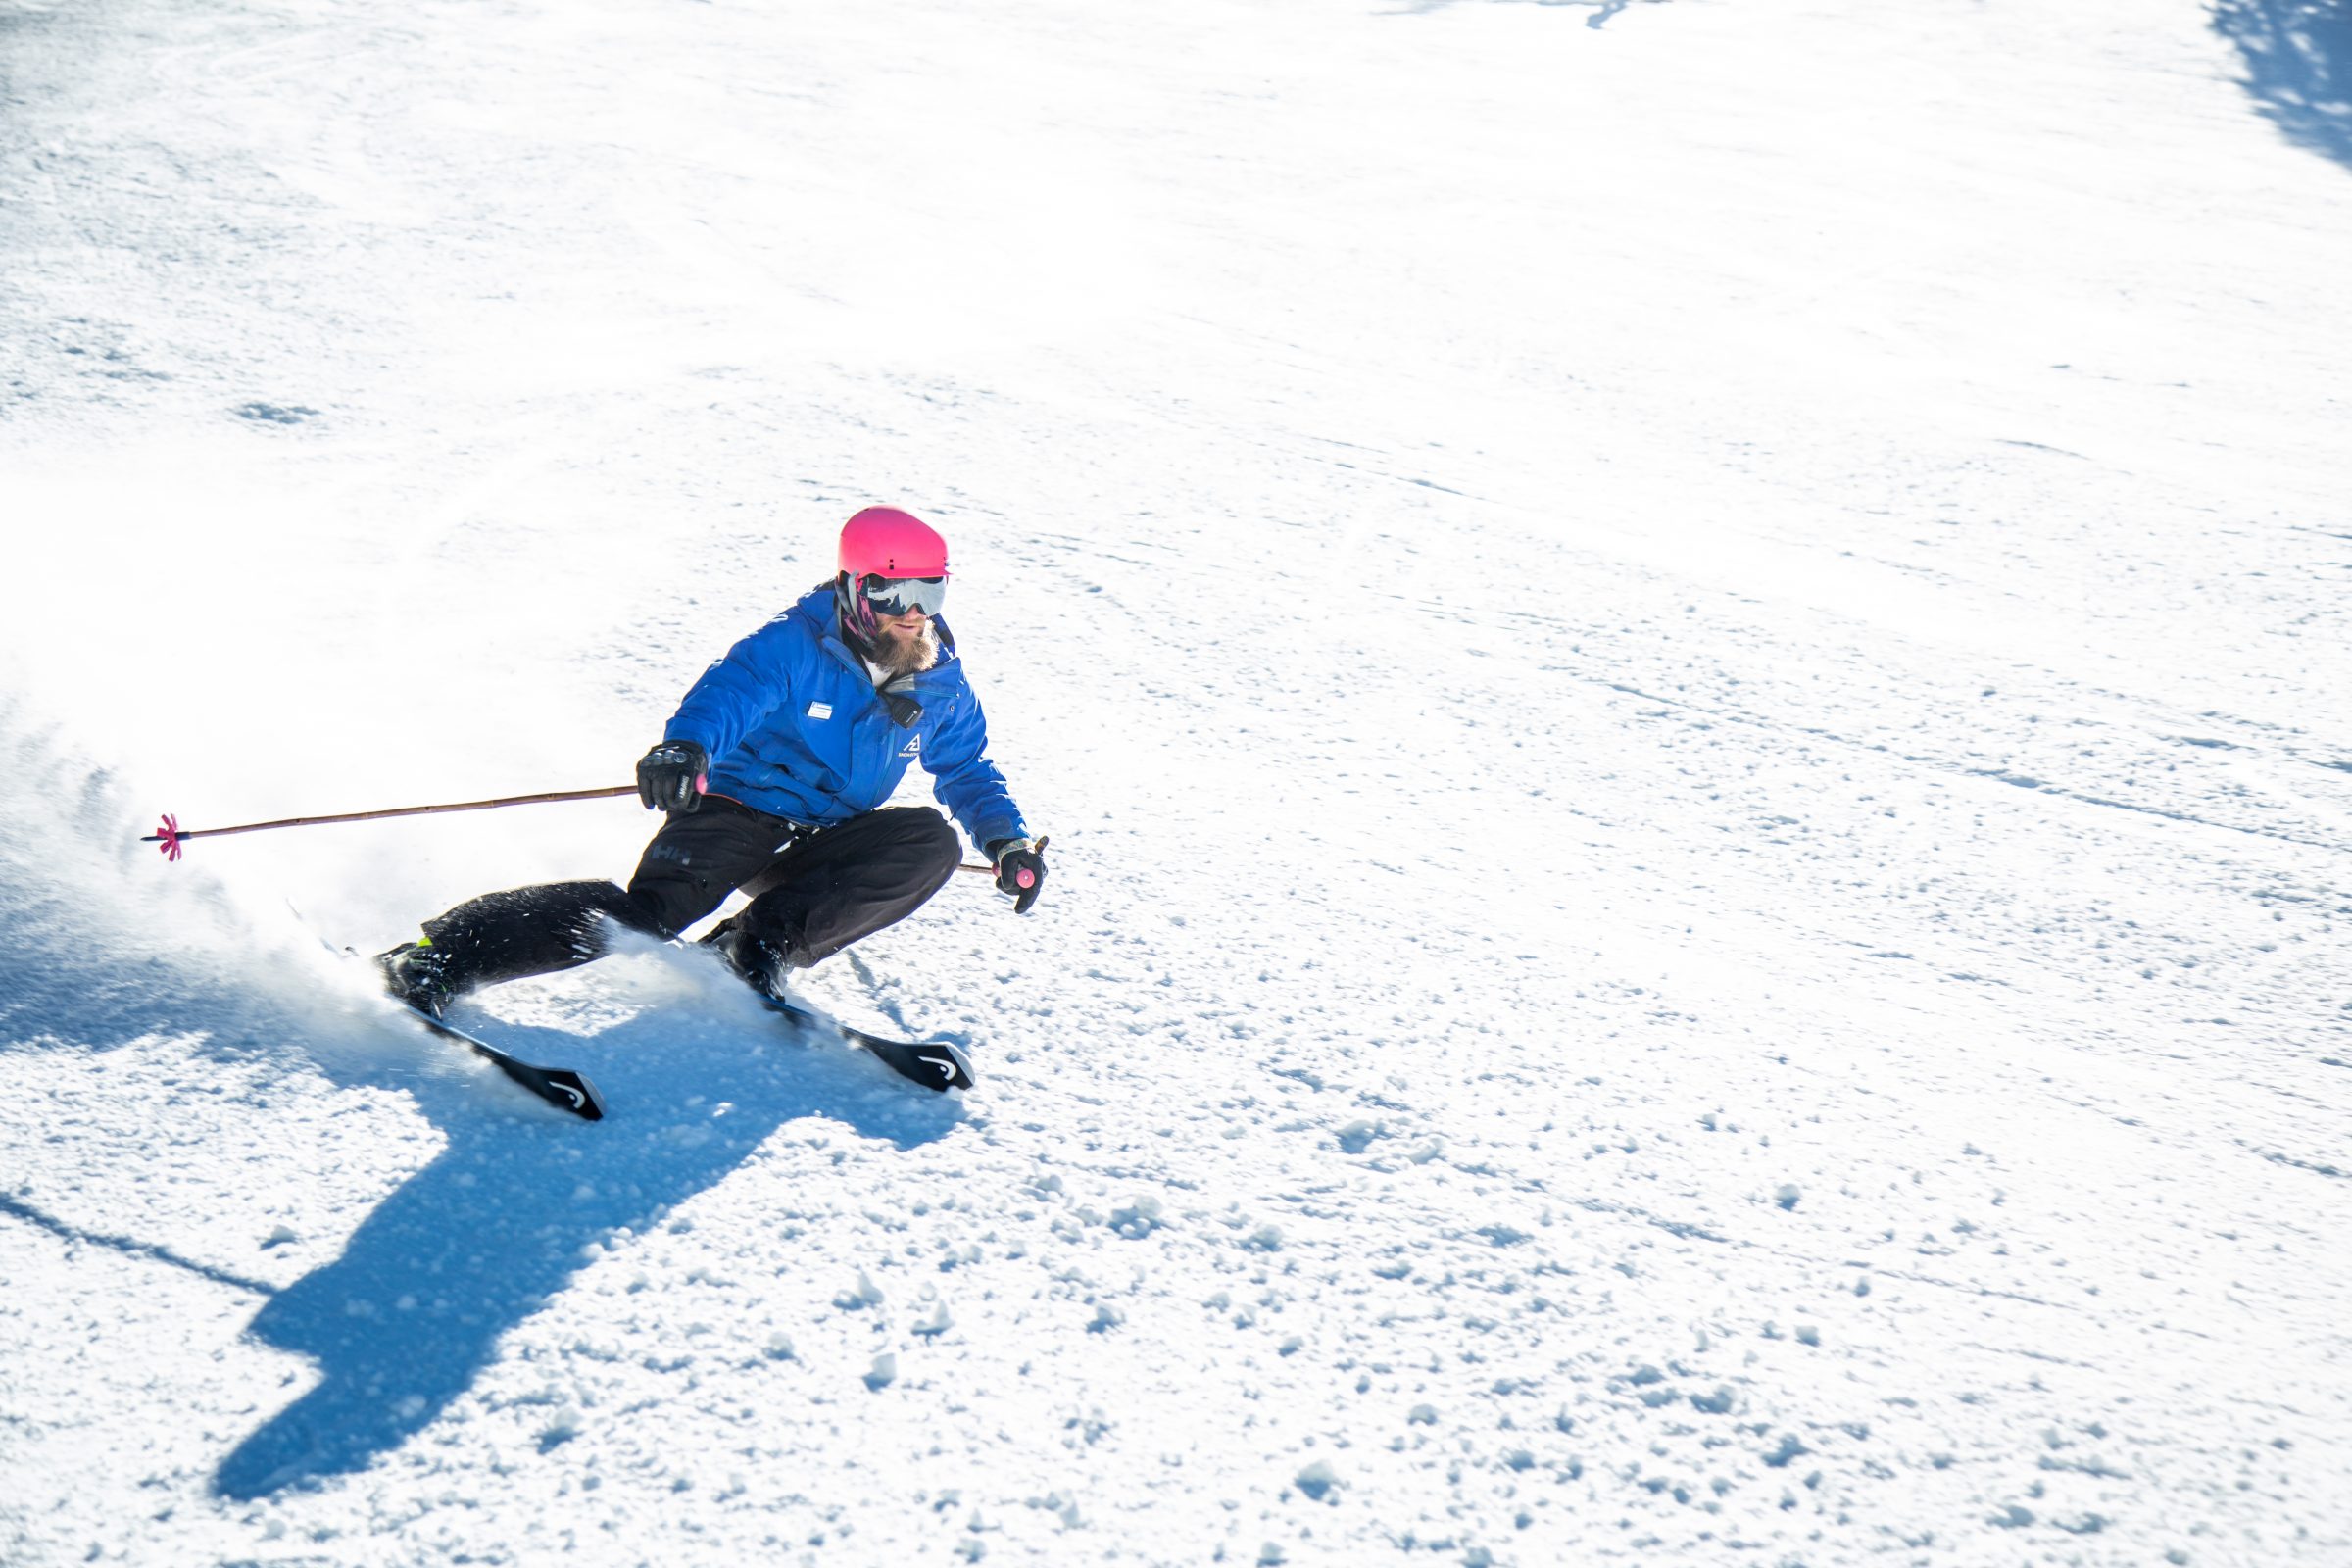 Person in blue jacket skiing down a snowy mountain